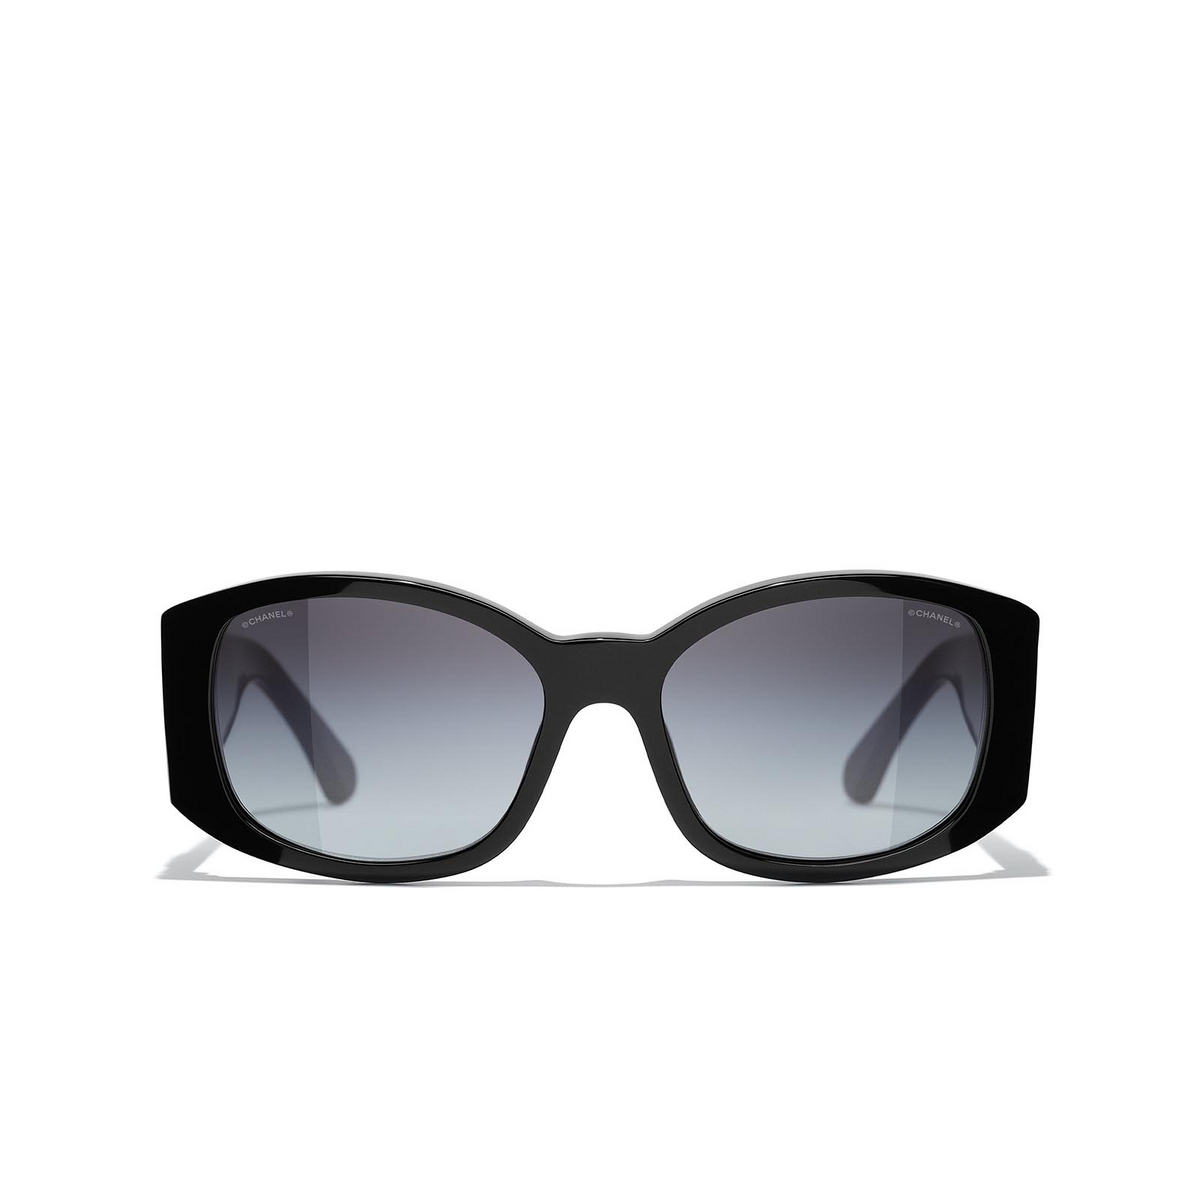 CHANEL oval Sunglasses C501S6 Black - front view